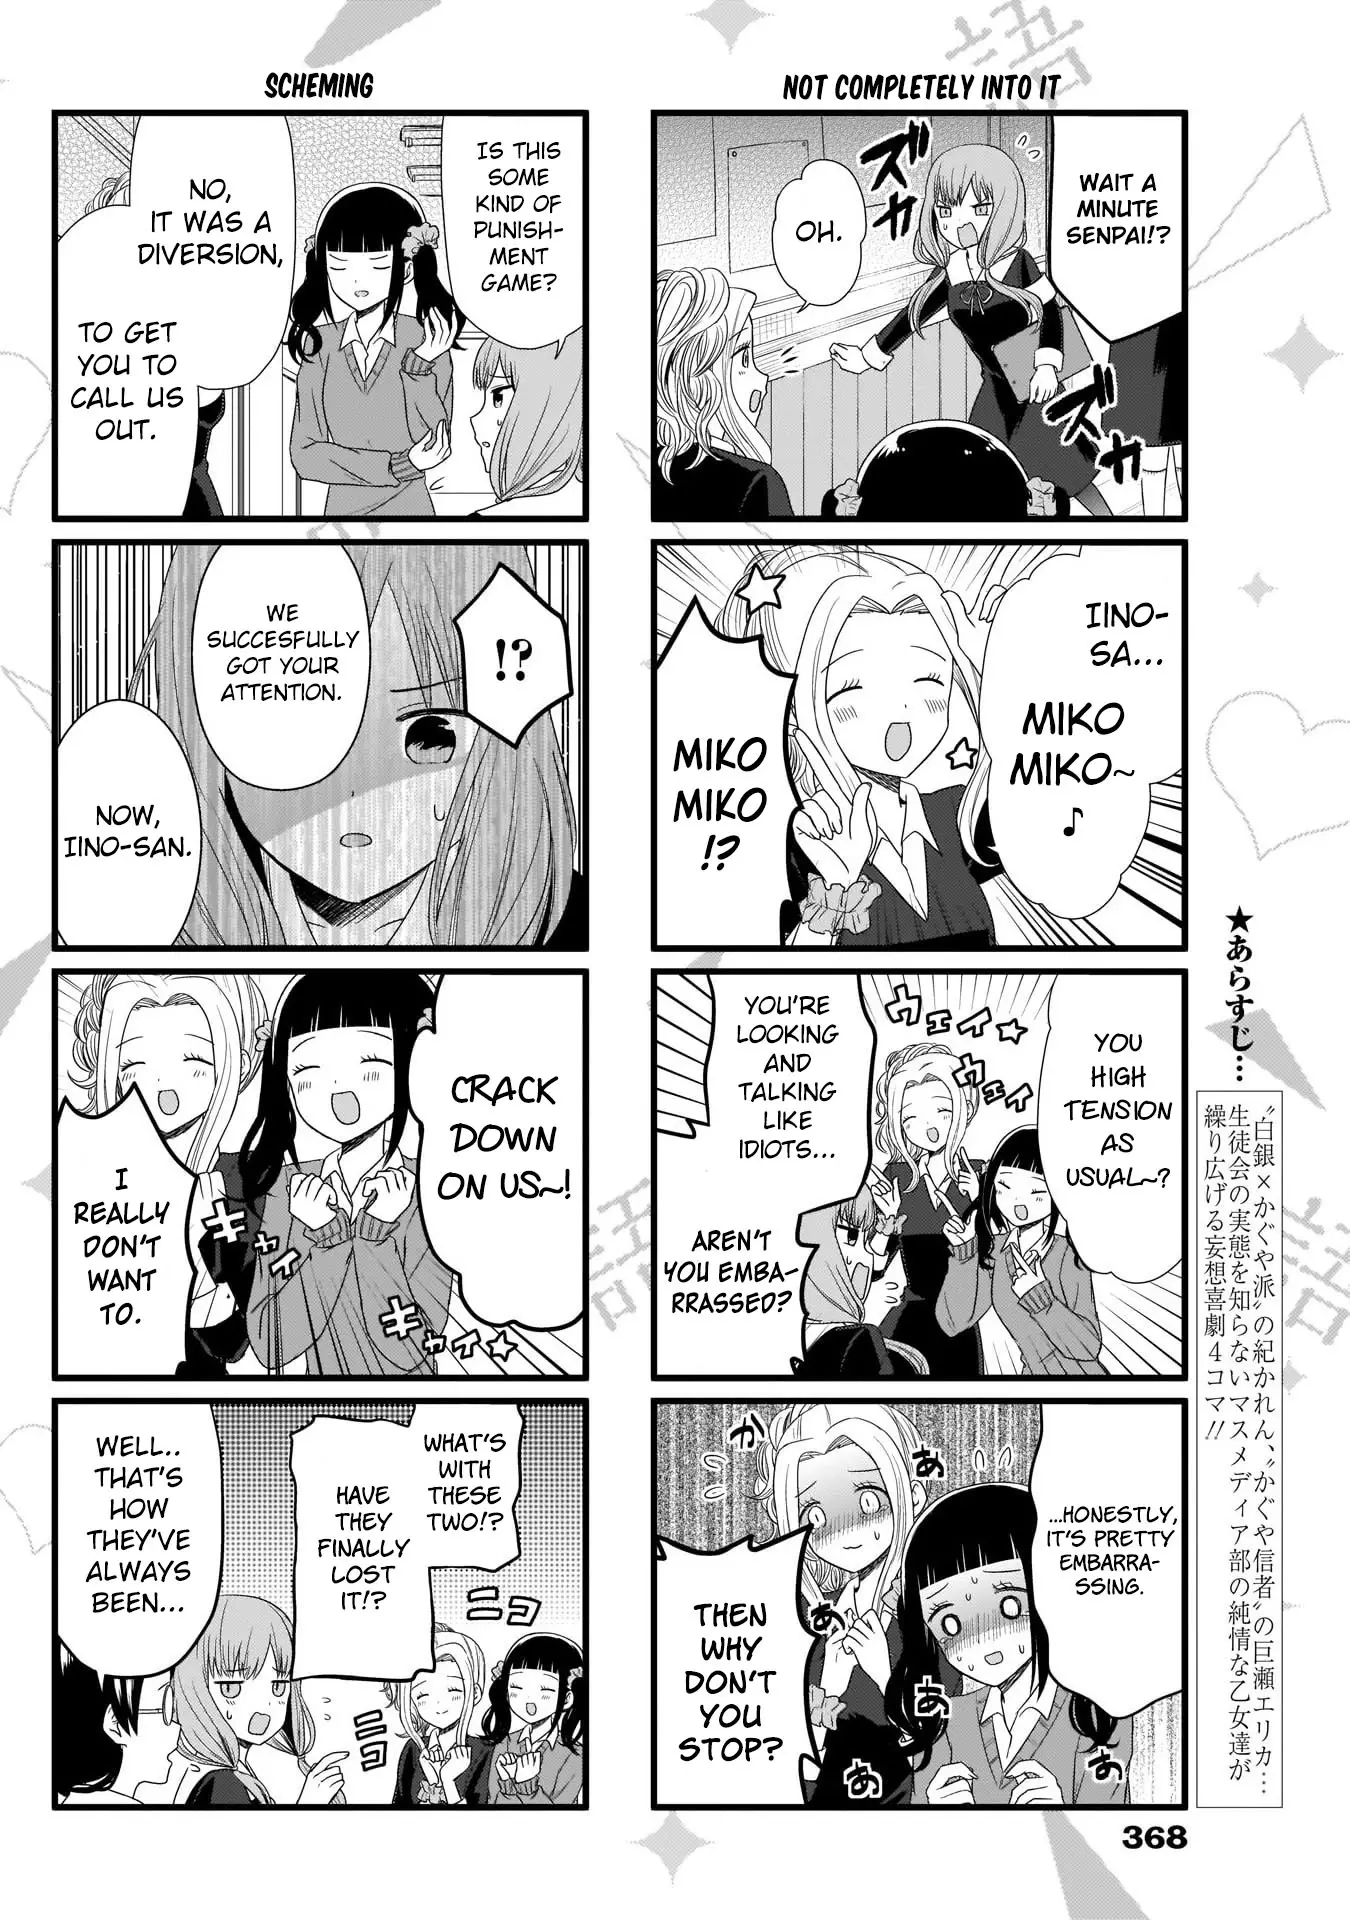 We Want To Talk About Kaguya - 62 page 2